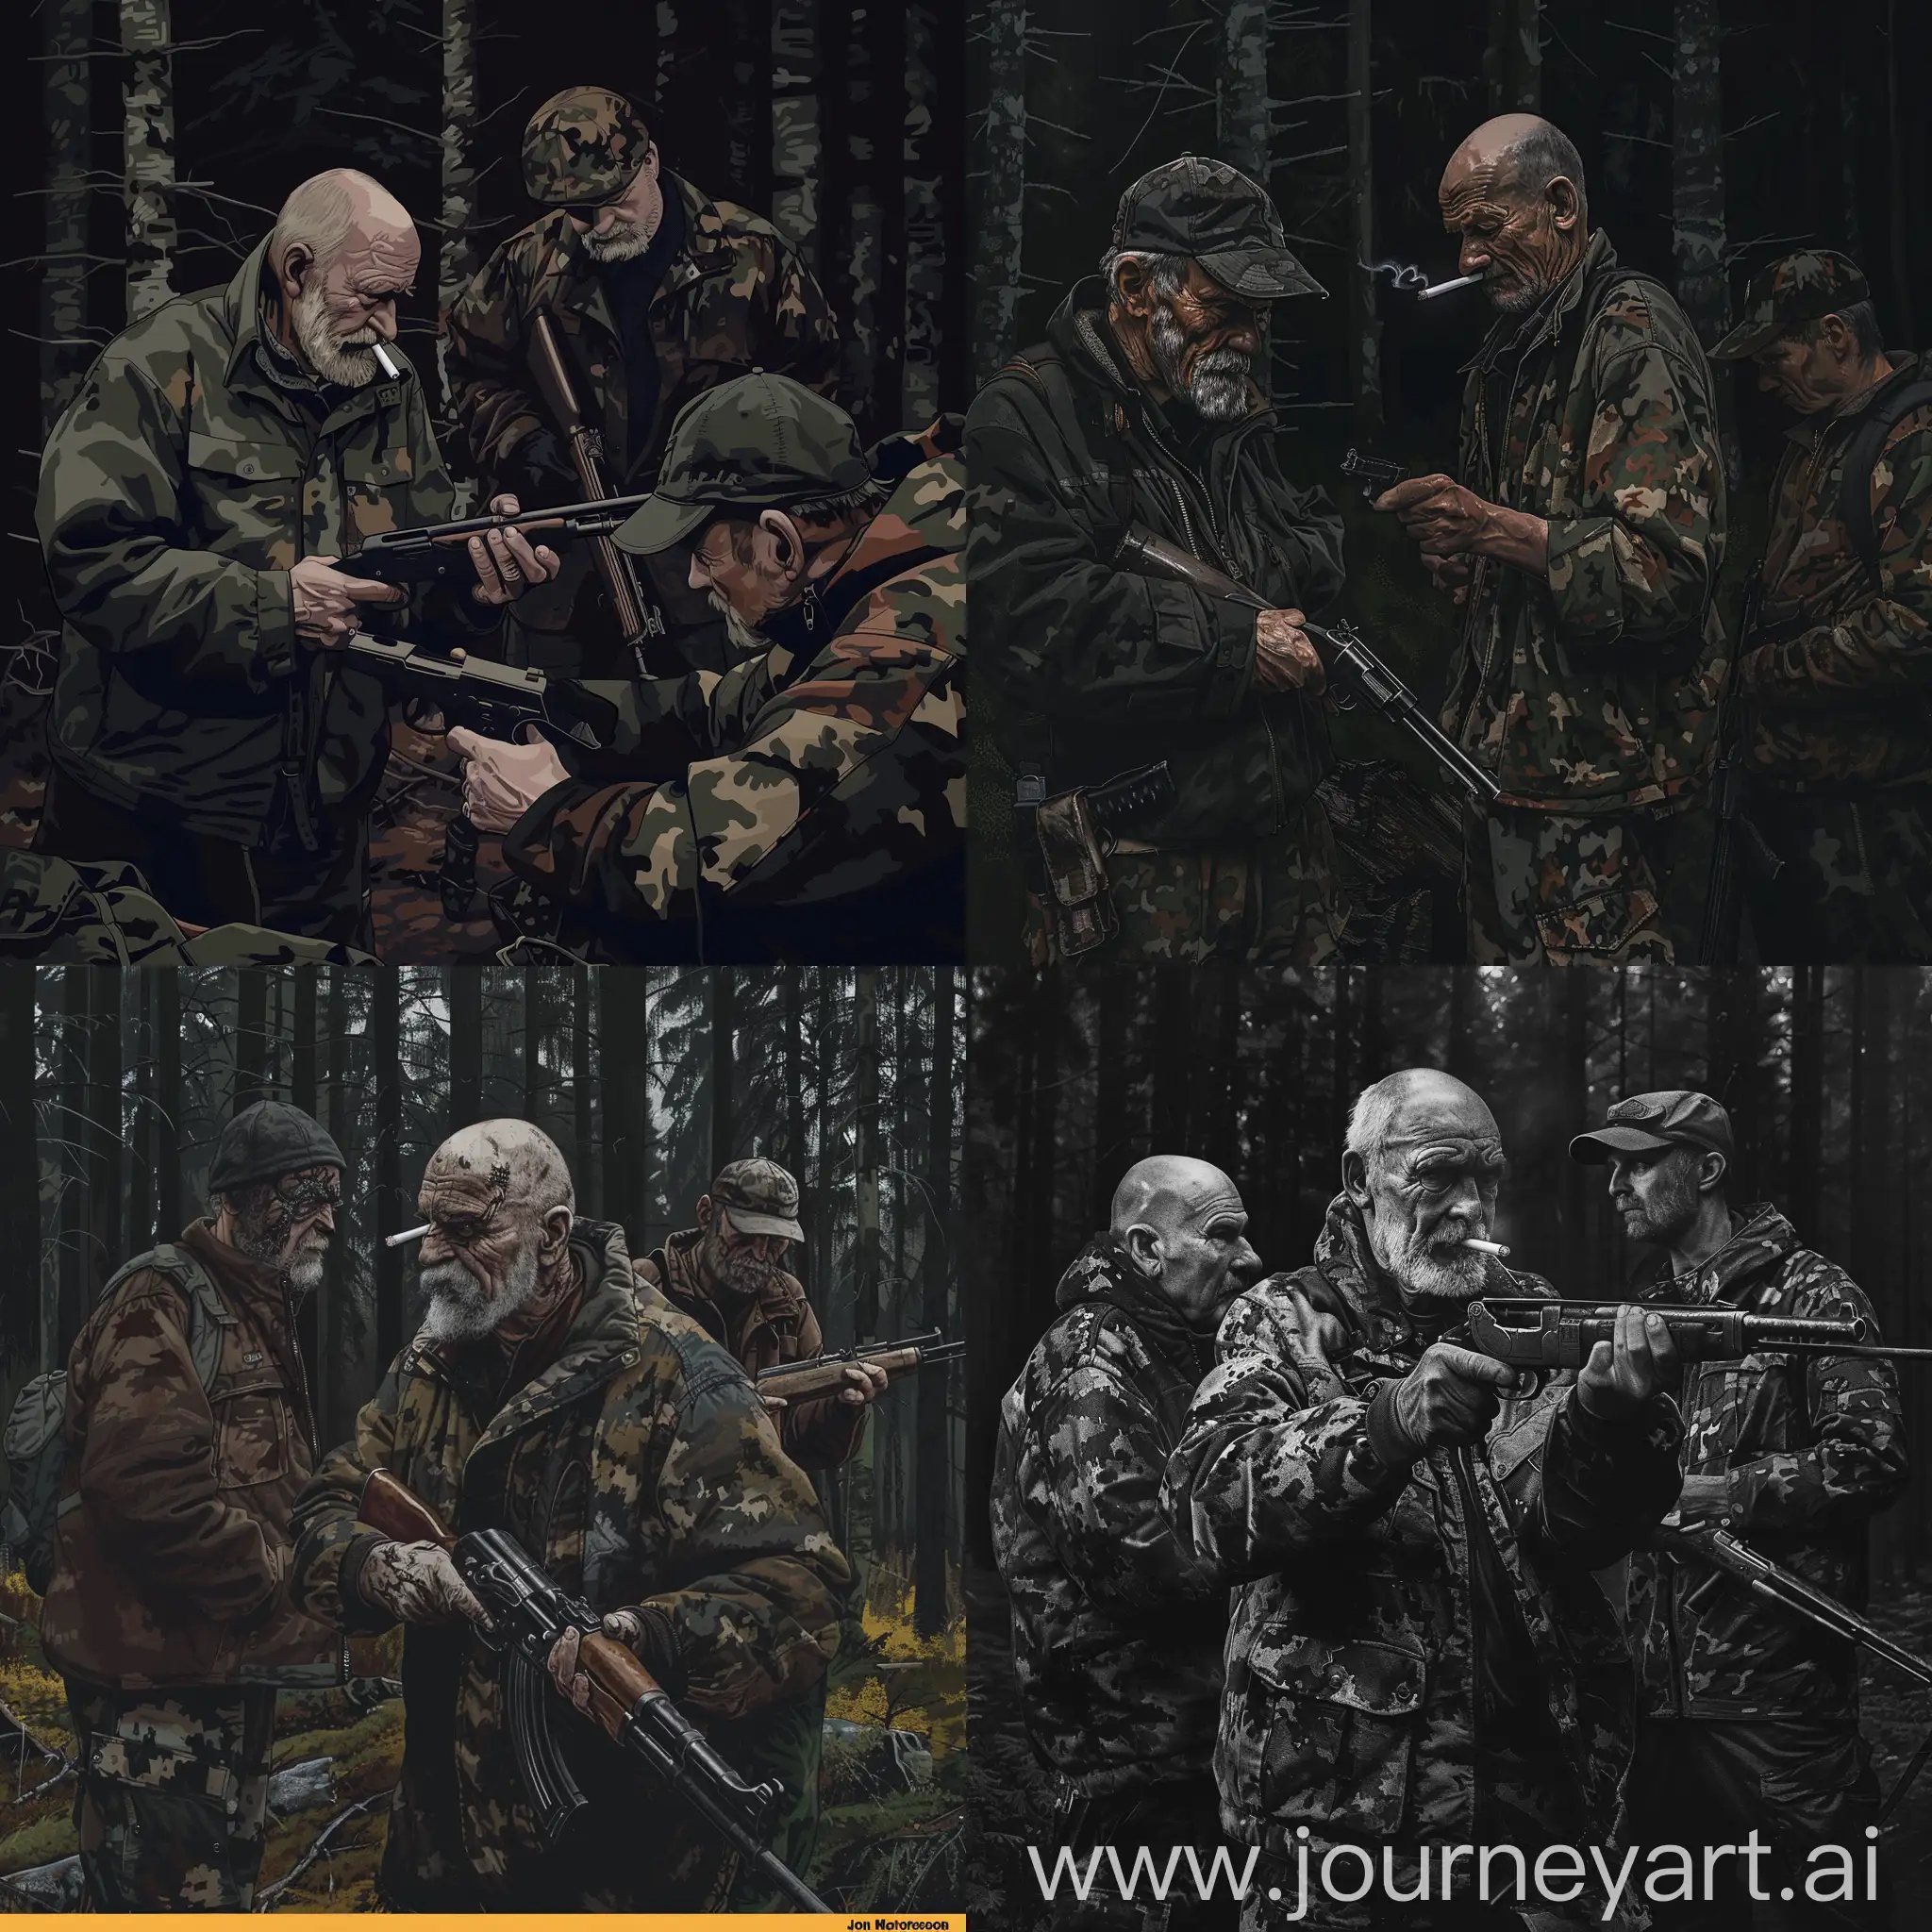 minimalist art, forest, taiga, three hunters, one hunter is an old man, a cigarette in his teeth, an old gun in his hands, an old camouflage jacket, a hat, a gray beard, another man is dressed in a camouflage jacket and dark trousers, a bald head, an old gun in his hand, a third man in a cap, a camouflage dark jacket, an old gun in his hands, forest, taiga, gloomy atmosphere, black anddrawing, Dark Fantasy Style, John Kenn Mortenson style draw